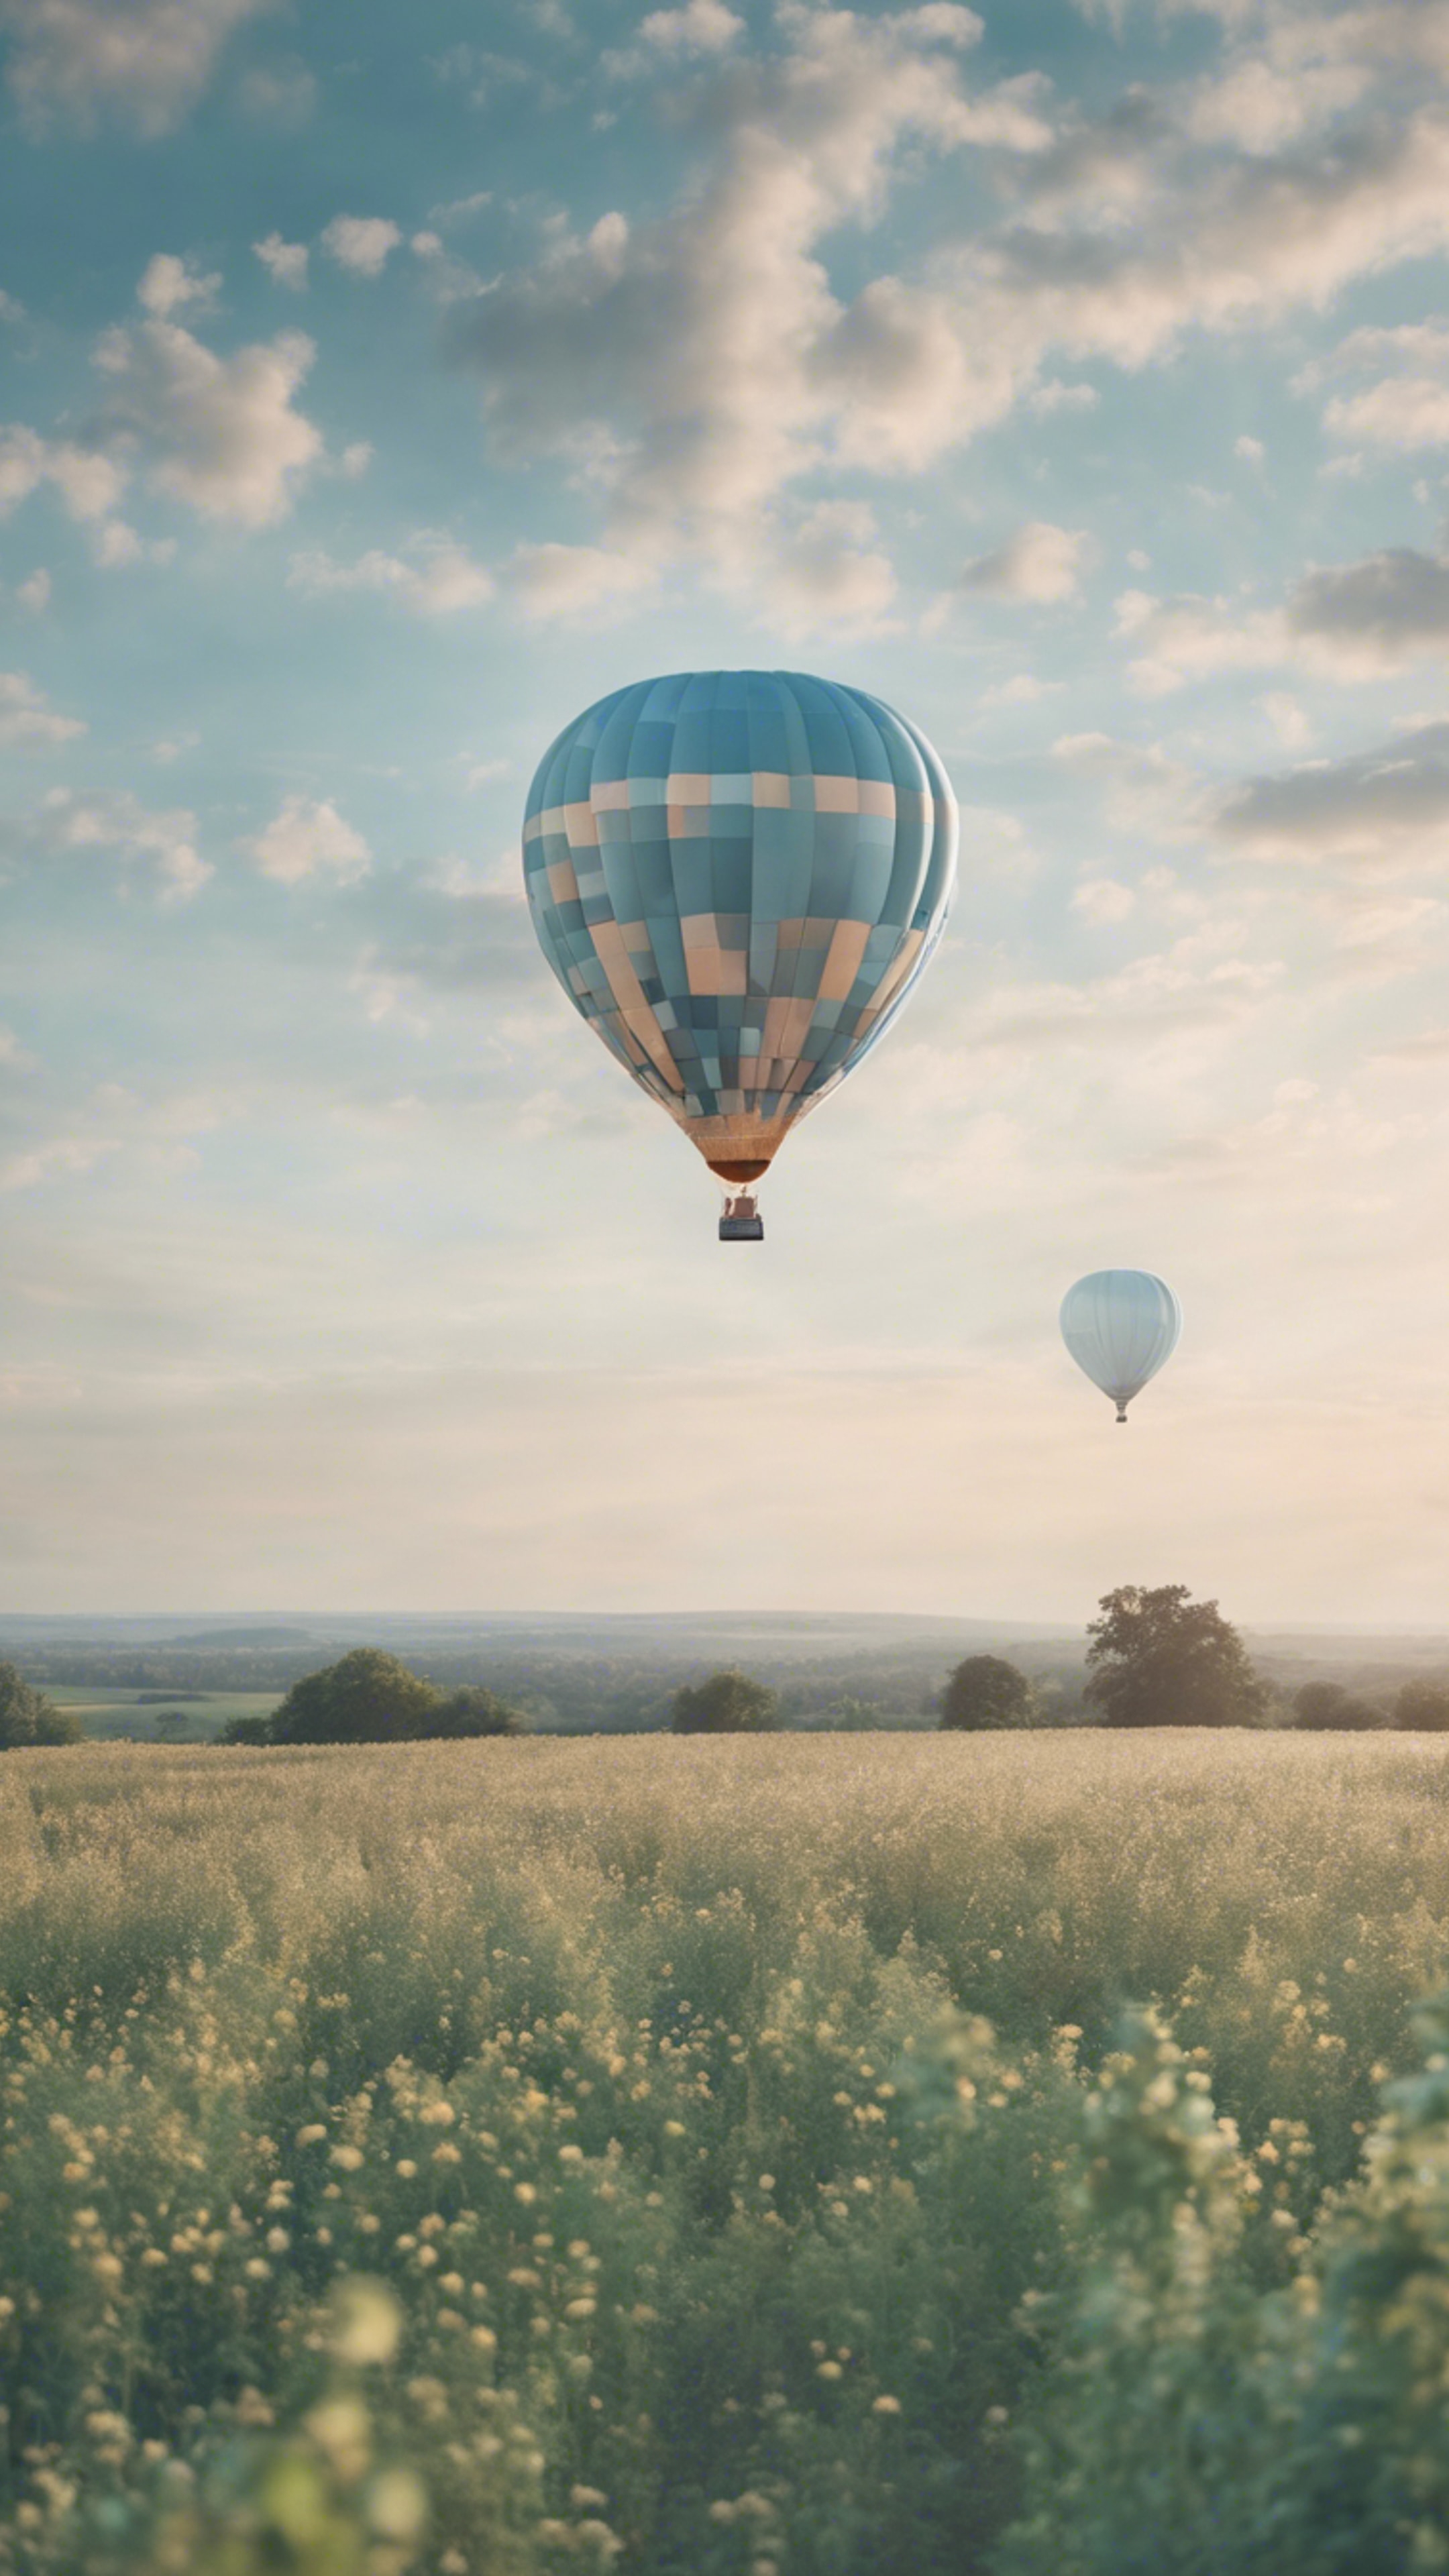 A pastel blue hot air balloon floating serenely above a patchwork field. 牆紙[b19c340976c044f4b3c6]